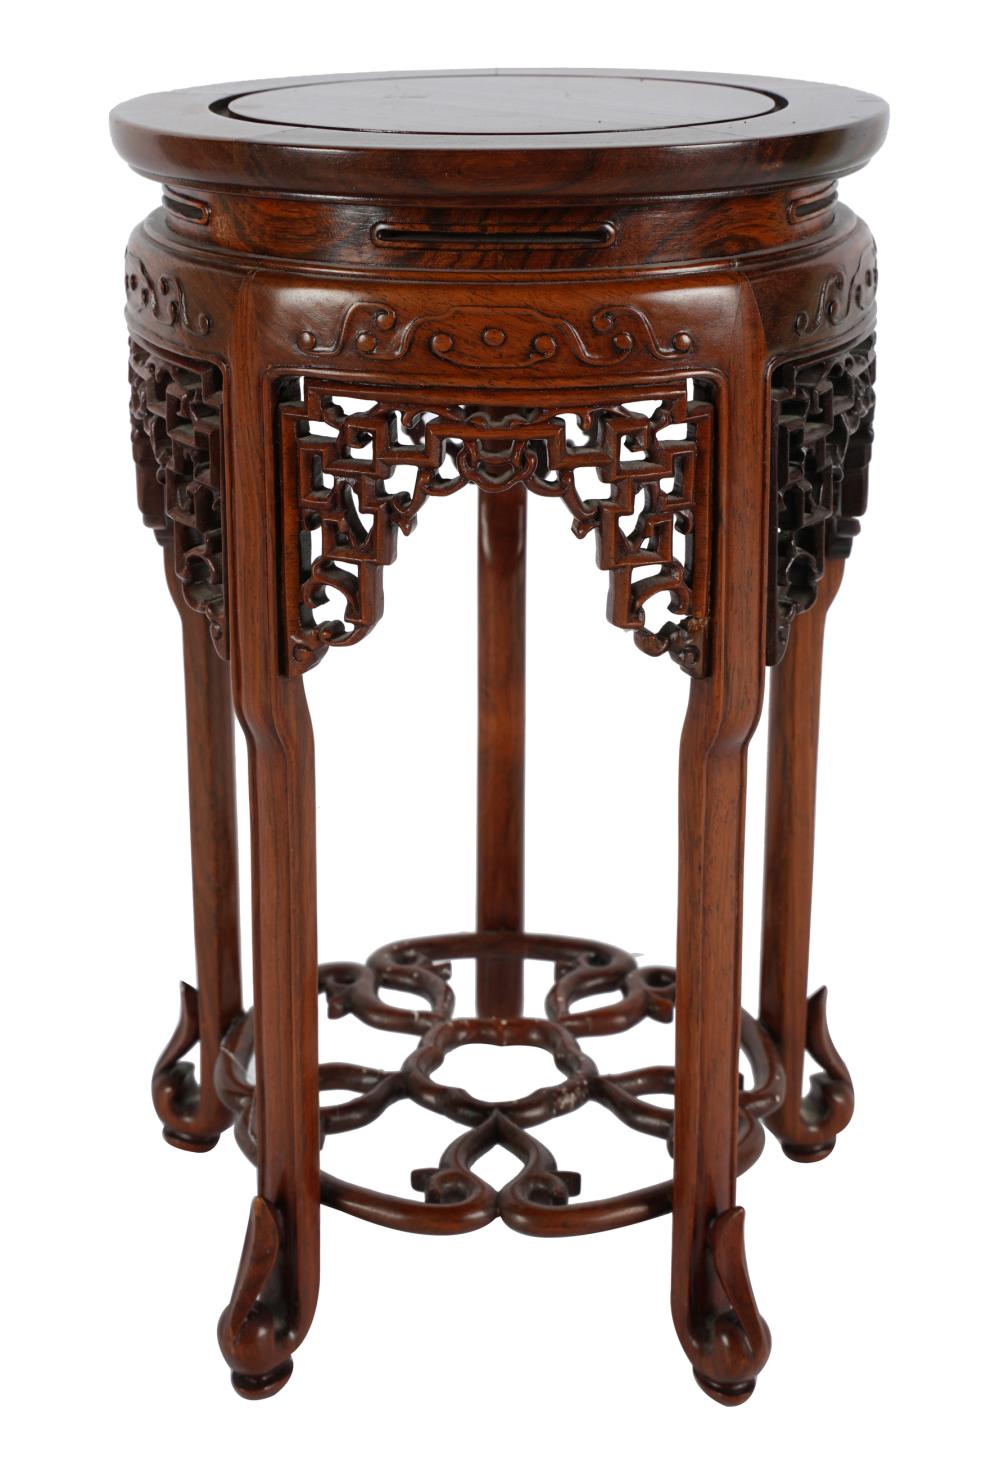 ASIAN CARVED HARDWOOD ROUND STANDwith 32e4ac